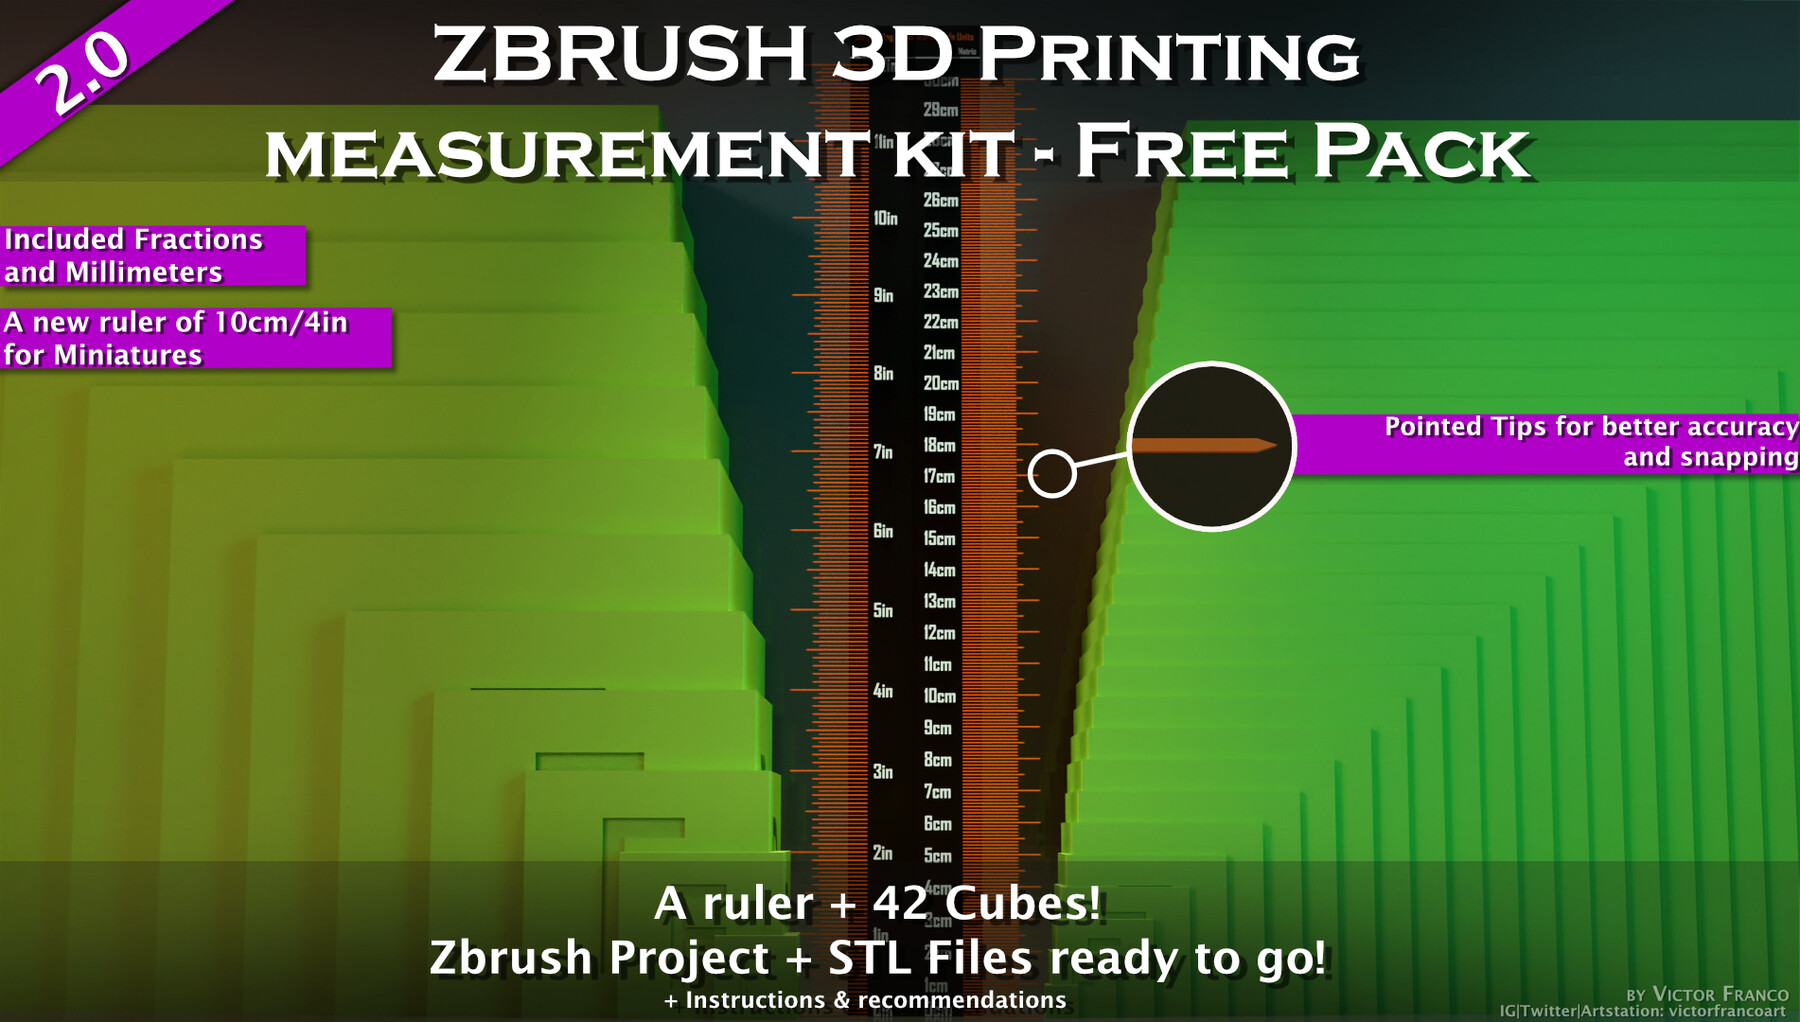 how does zbrush measure real life units for 3d printing